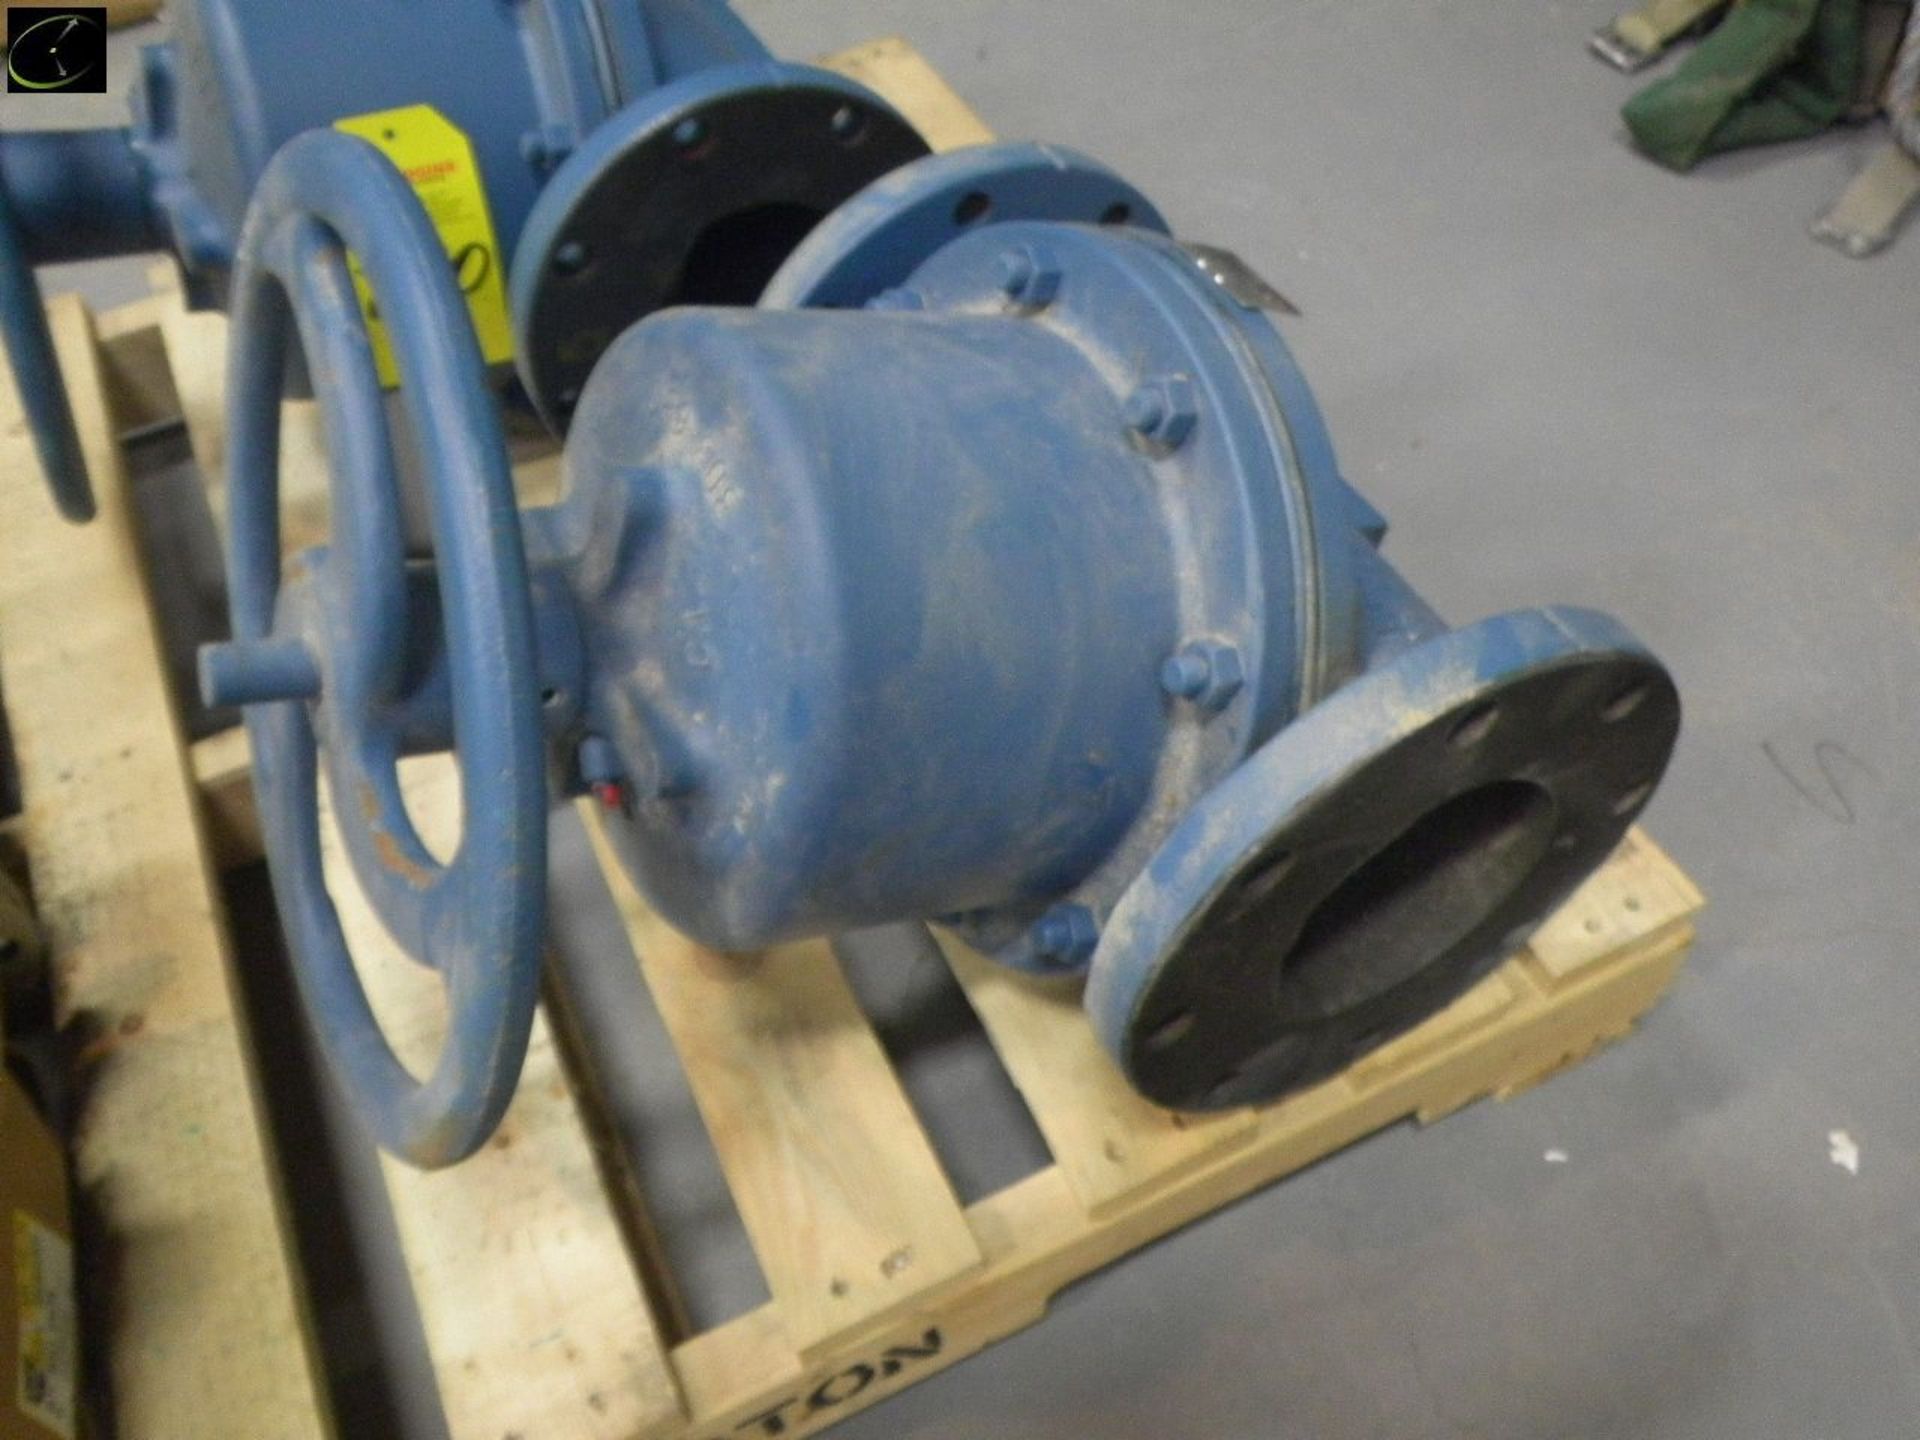 TWO 6'' Gate Valves. - Image 2 of 3